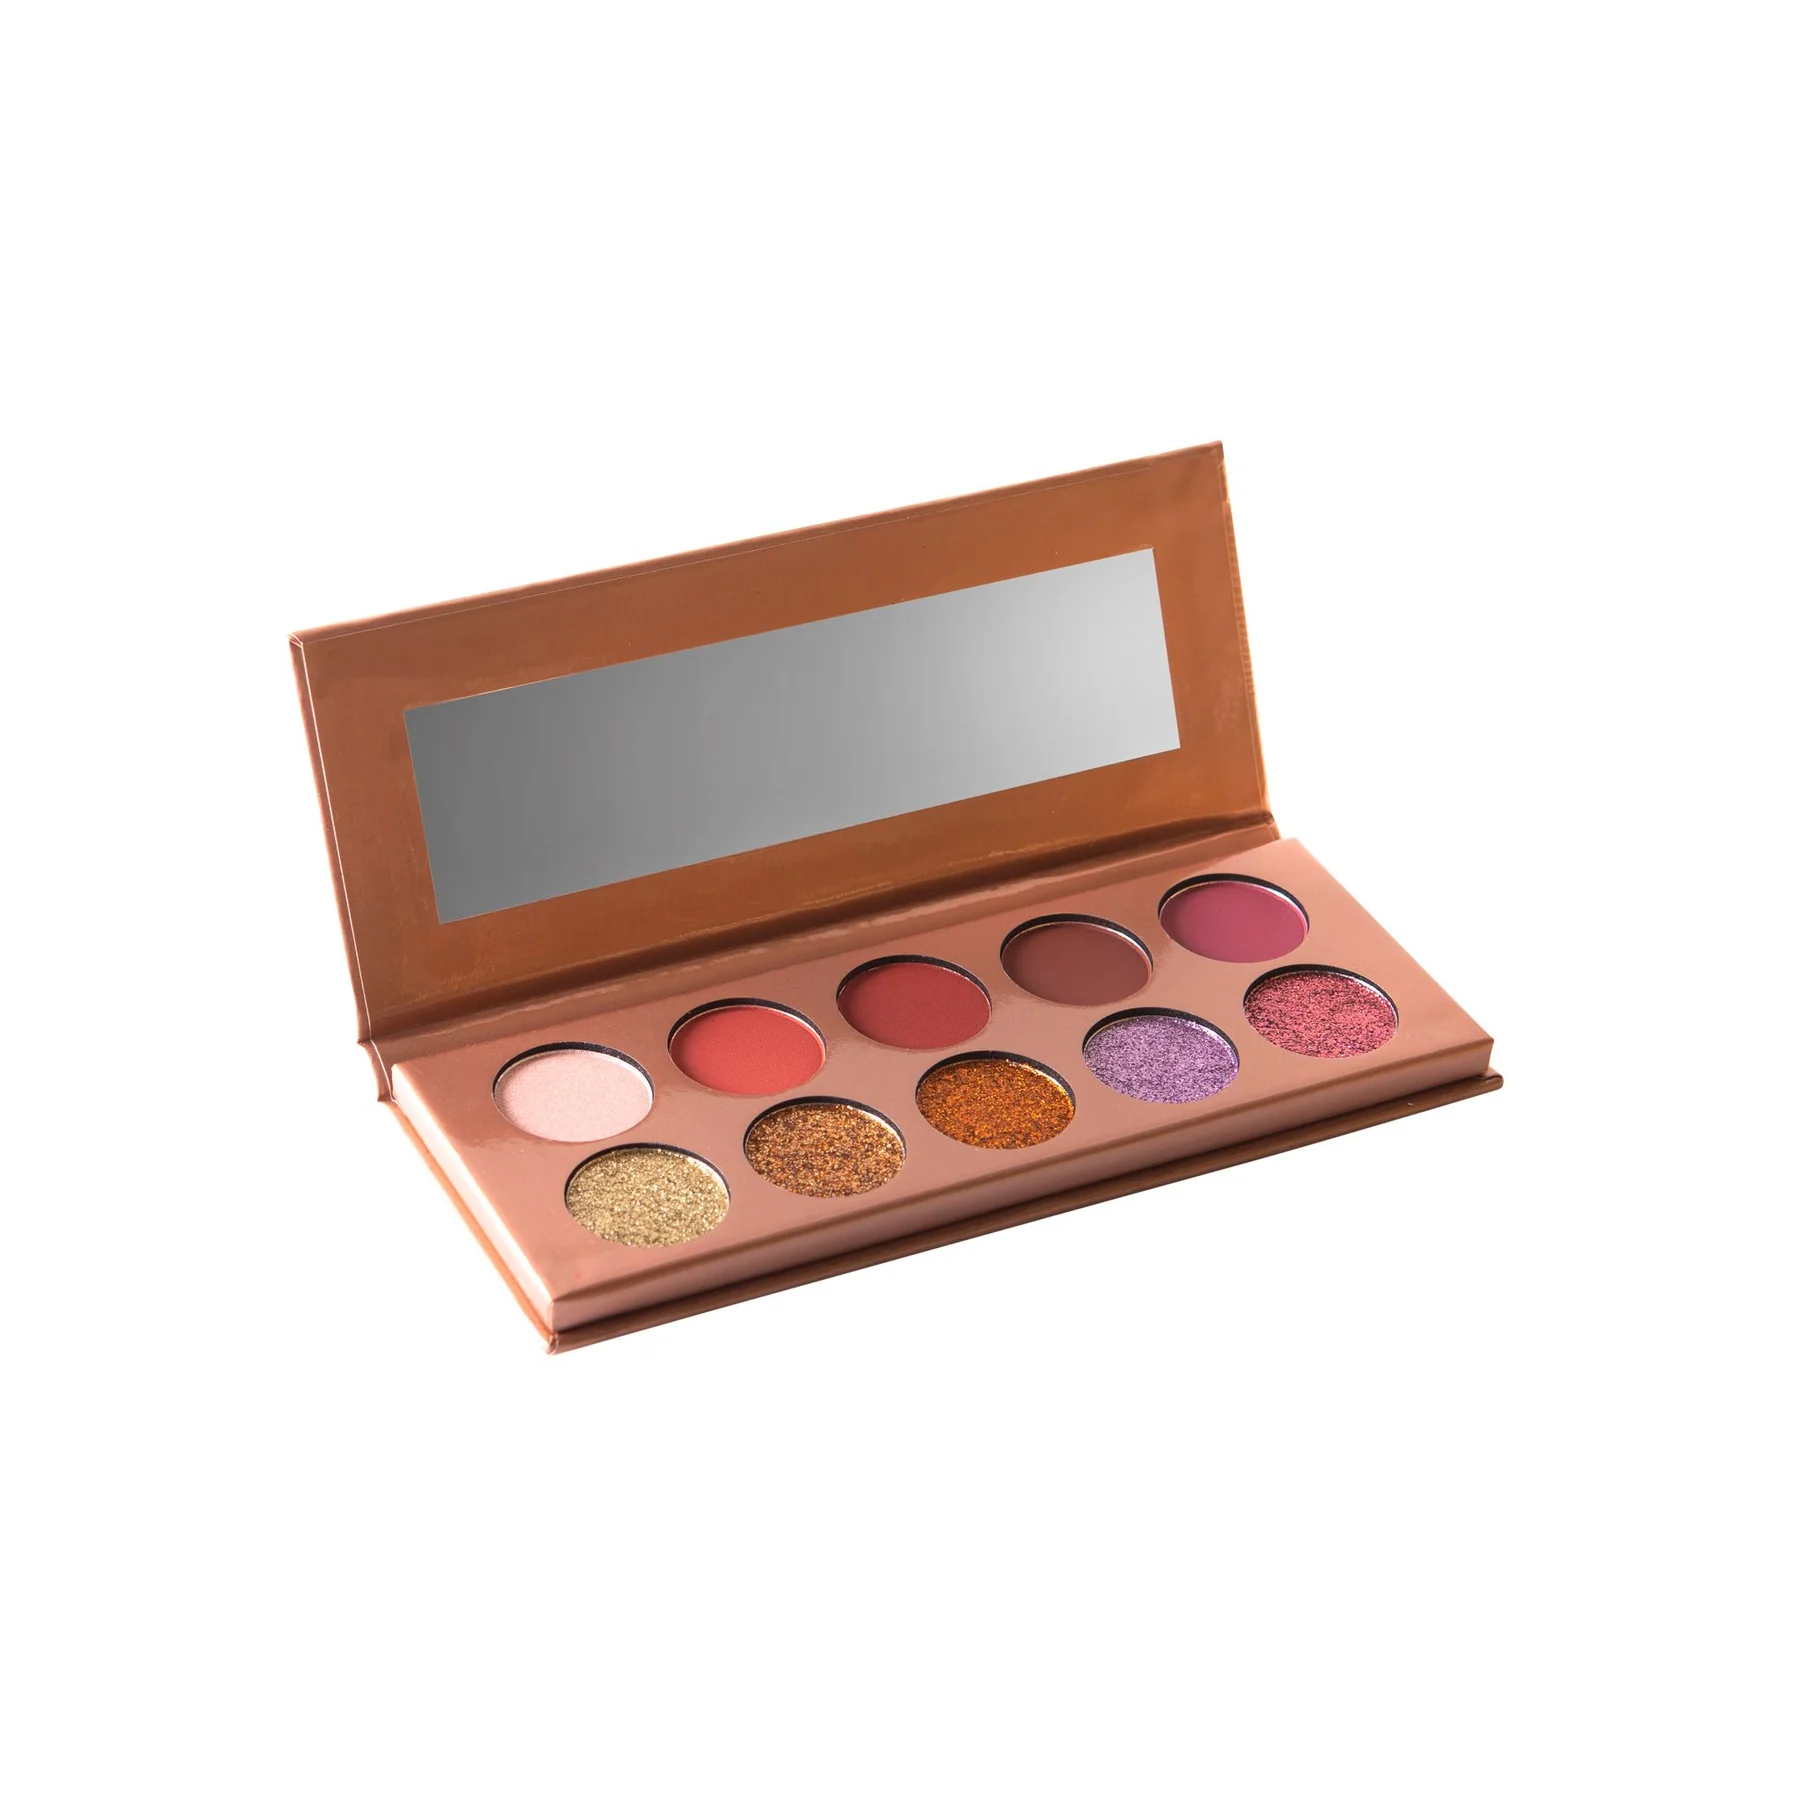 Trend Beauty Eyeshadow 10 Color Rose Gold Glitter Palette